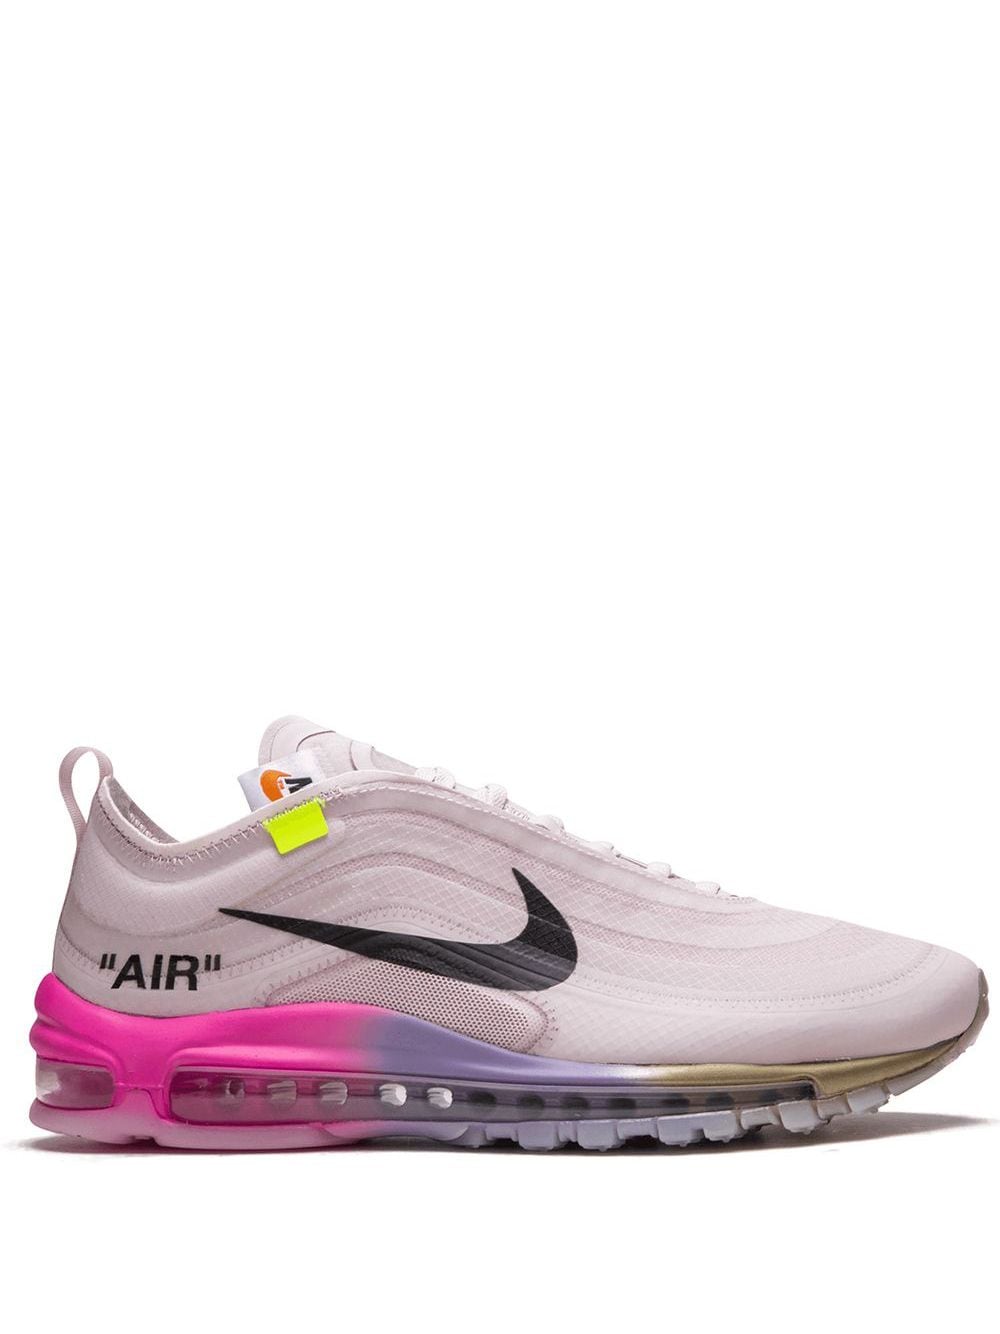 Nike X Off-White The 10: Air Max 97 OG "Queen" sneakers - Pink von Nike X Off-White